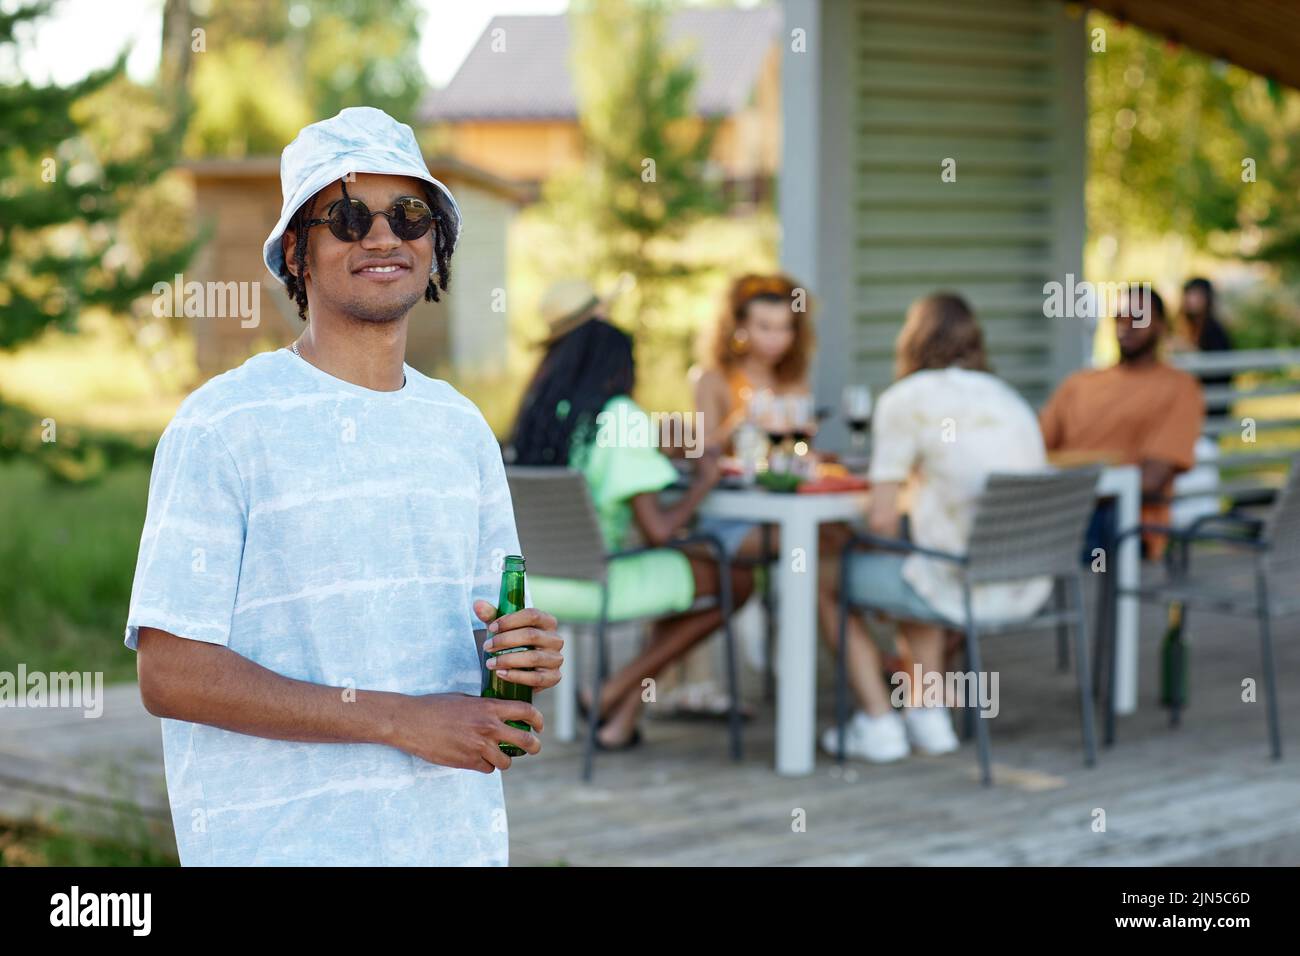 Waist up portrait of black young man wearing sunglasses smiling at camera and holding drink during outdoor party with friends in Summer, copy space Stock Photo